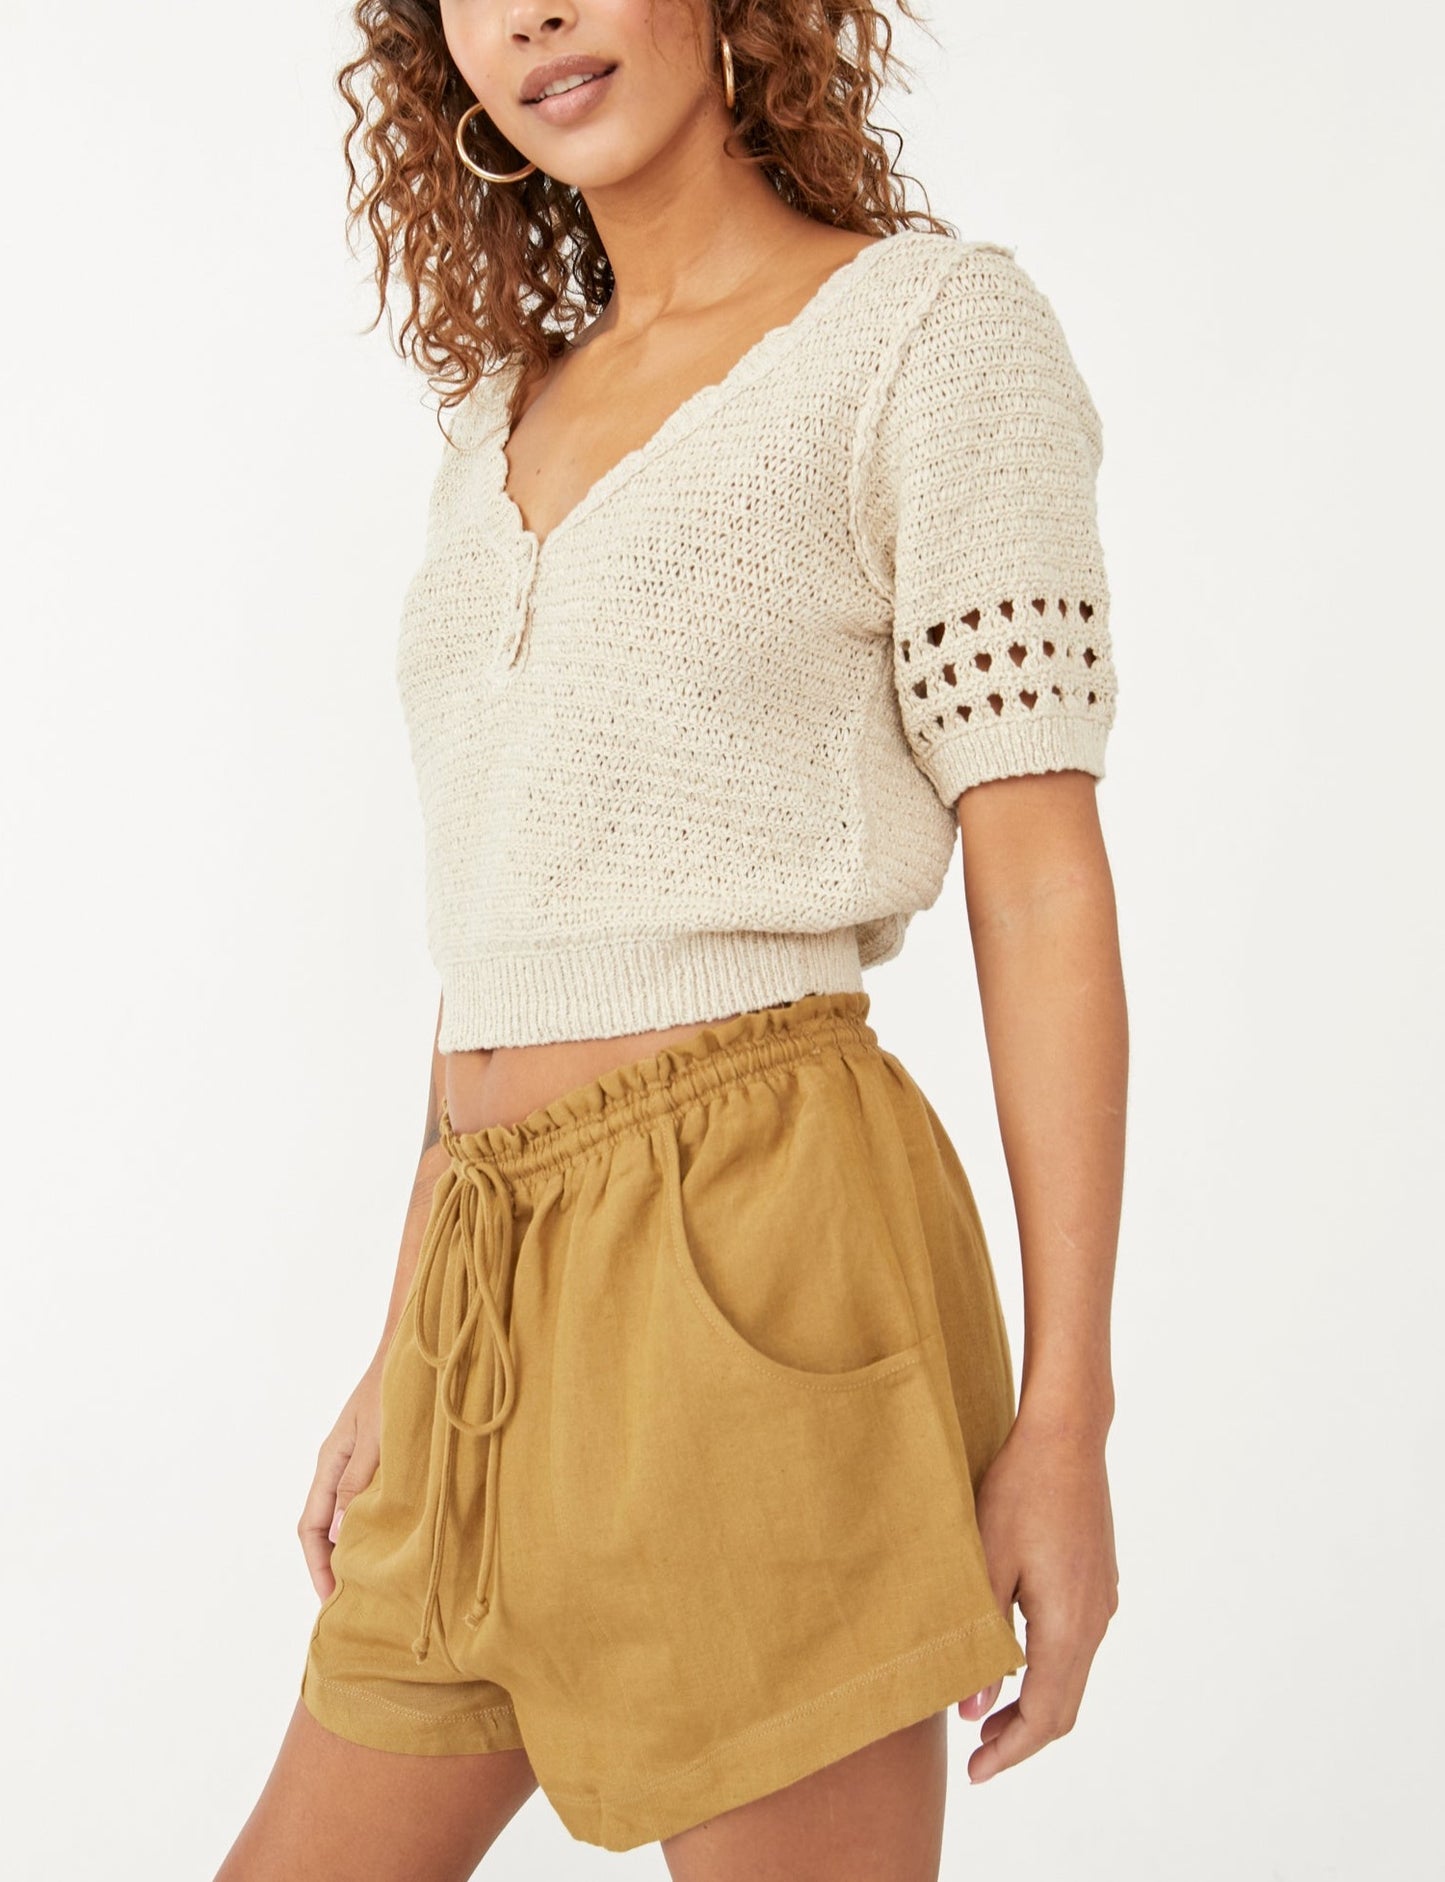 Bree Pullover Free People